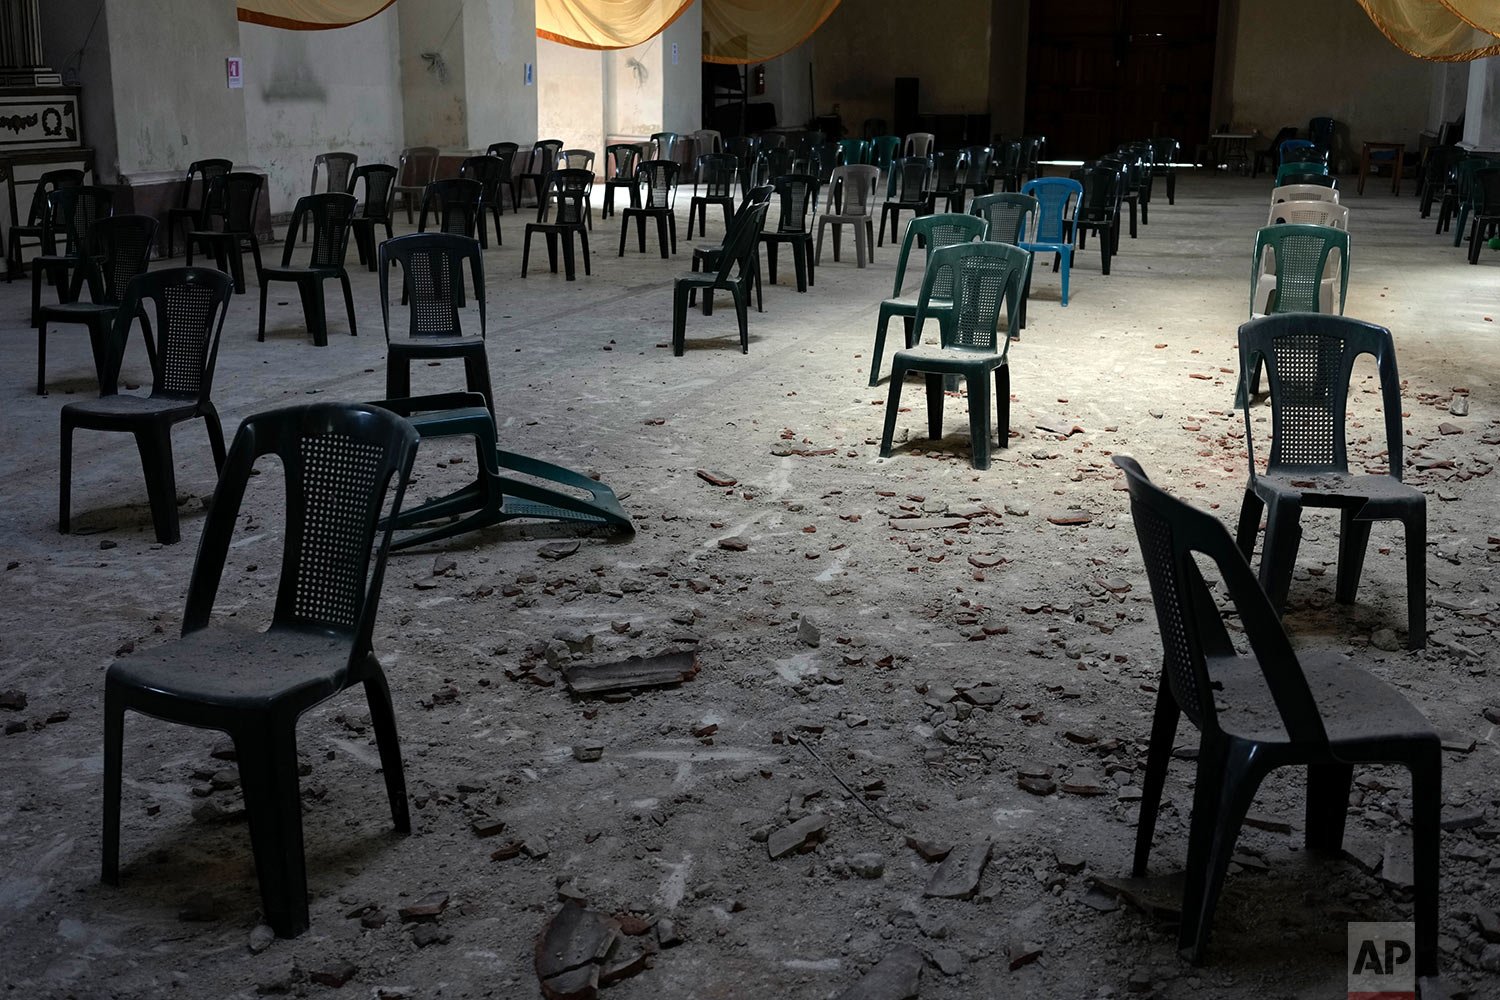  Debris blankets the floor in a partially collapsed San Juan Bautista church, triggered by an overnight 6.2-magnitude earthquake in Amatitlan, Guatemala, Feb. 16, 2022. The Guatemalan emergency agency CONRED reported structural damage in at least sev